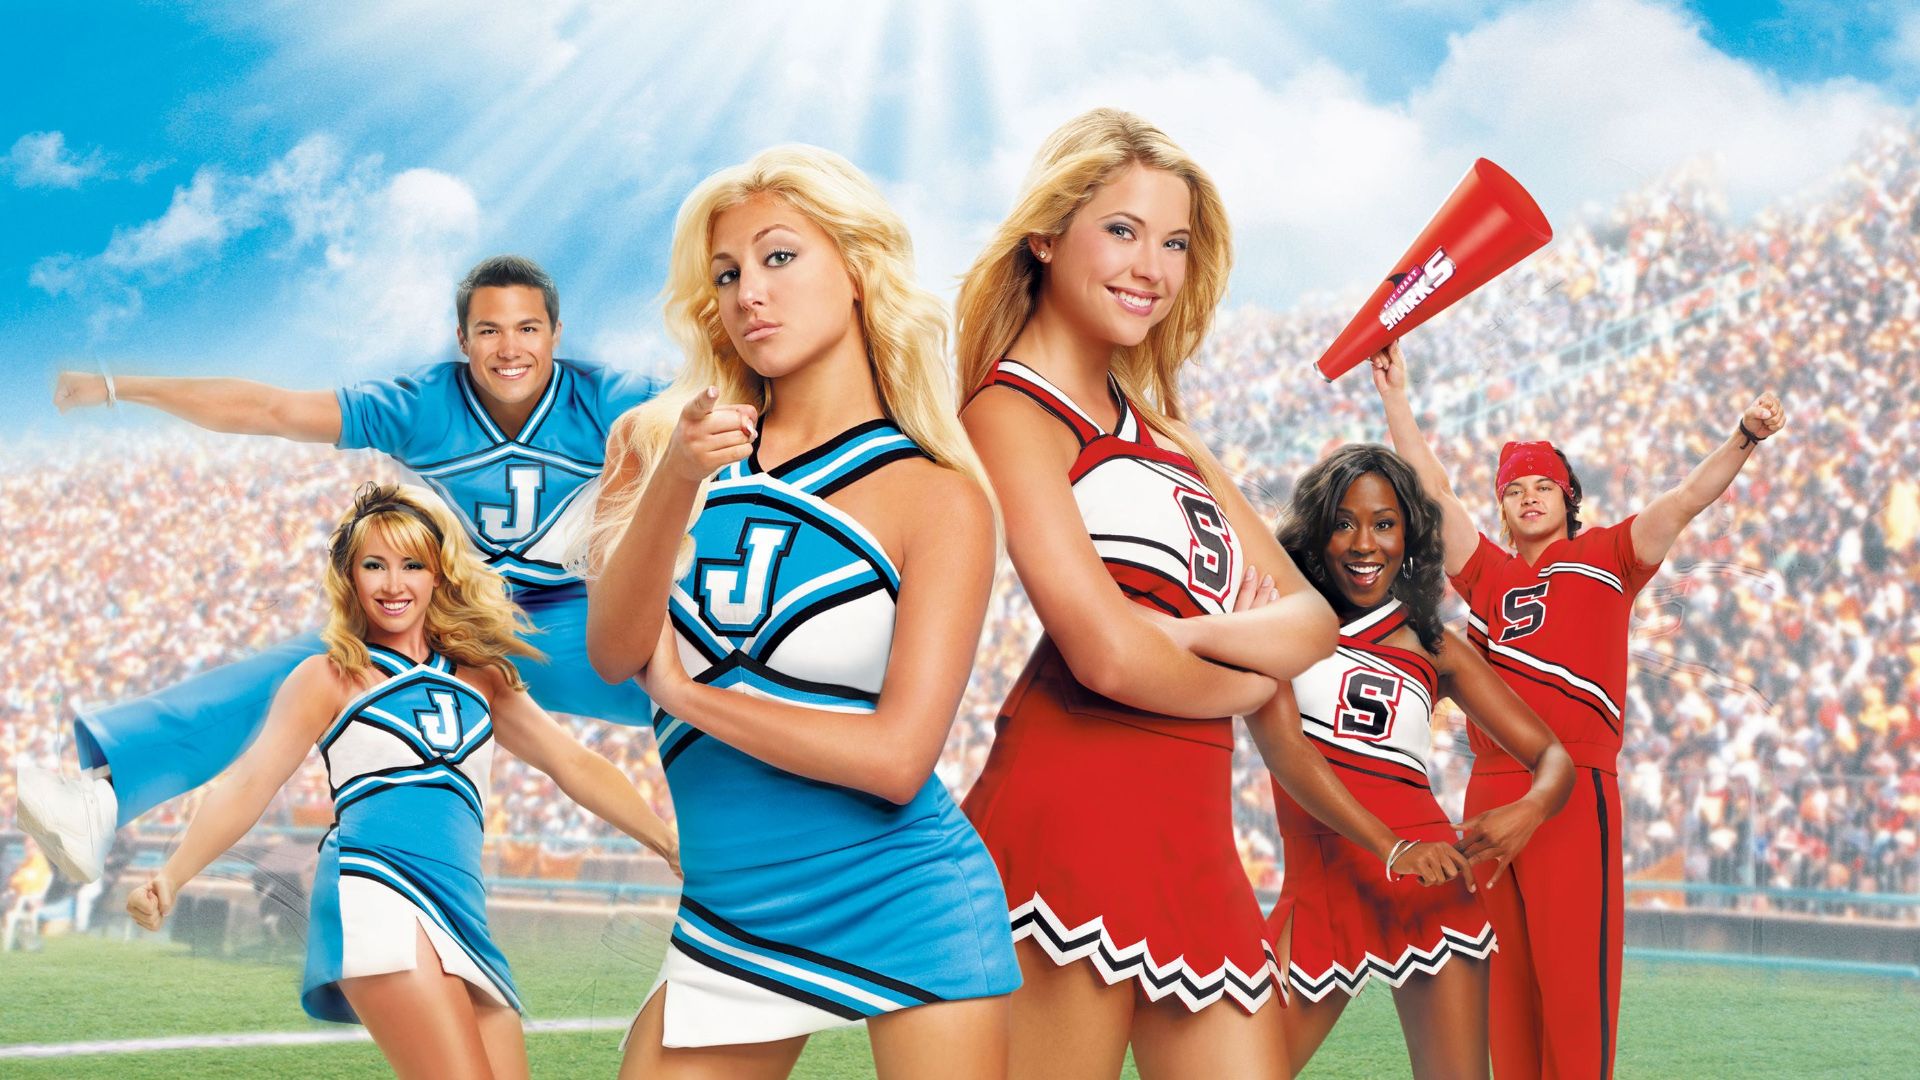 Bring It On: In It to Win It background